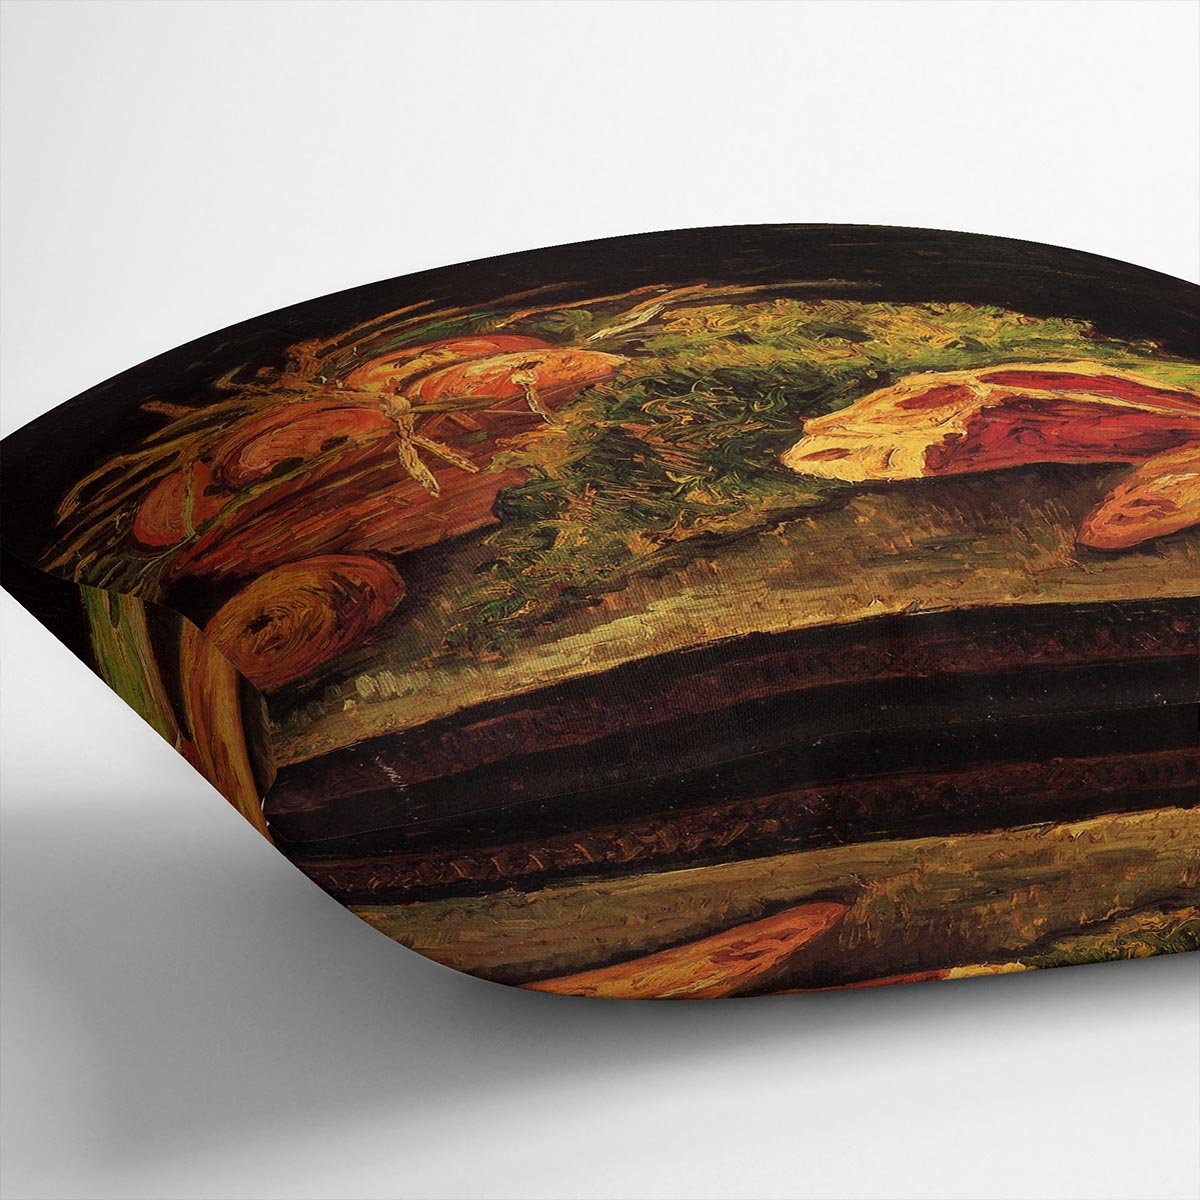 Still Life with Apples Meat and a Roll by Van Gogh Throw Pillow